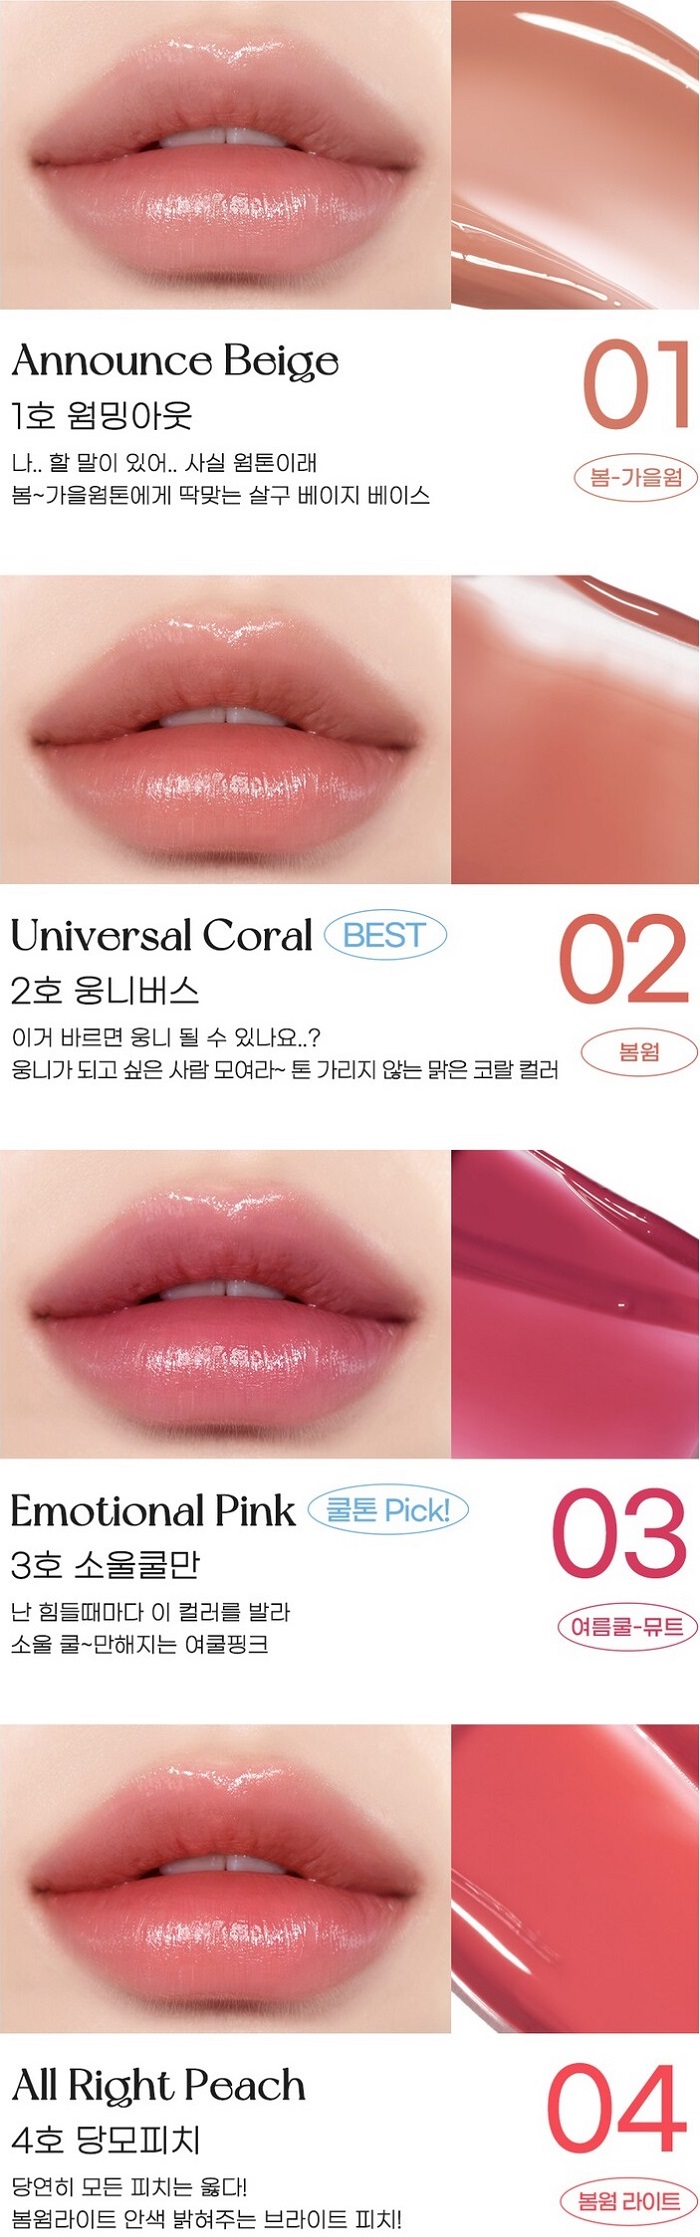 PERIPERA Water Bare Tint Announce Beige Universal Coral Emotional Pink All Right Peach 3.7g